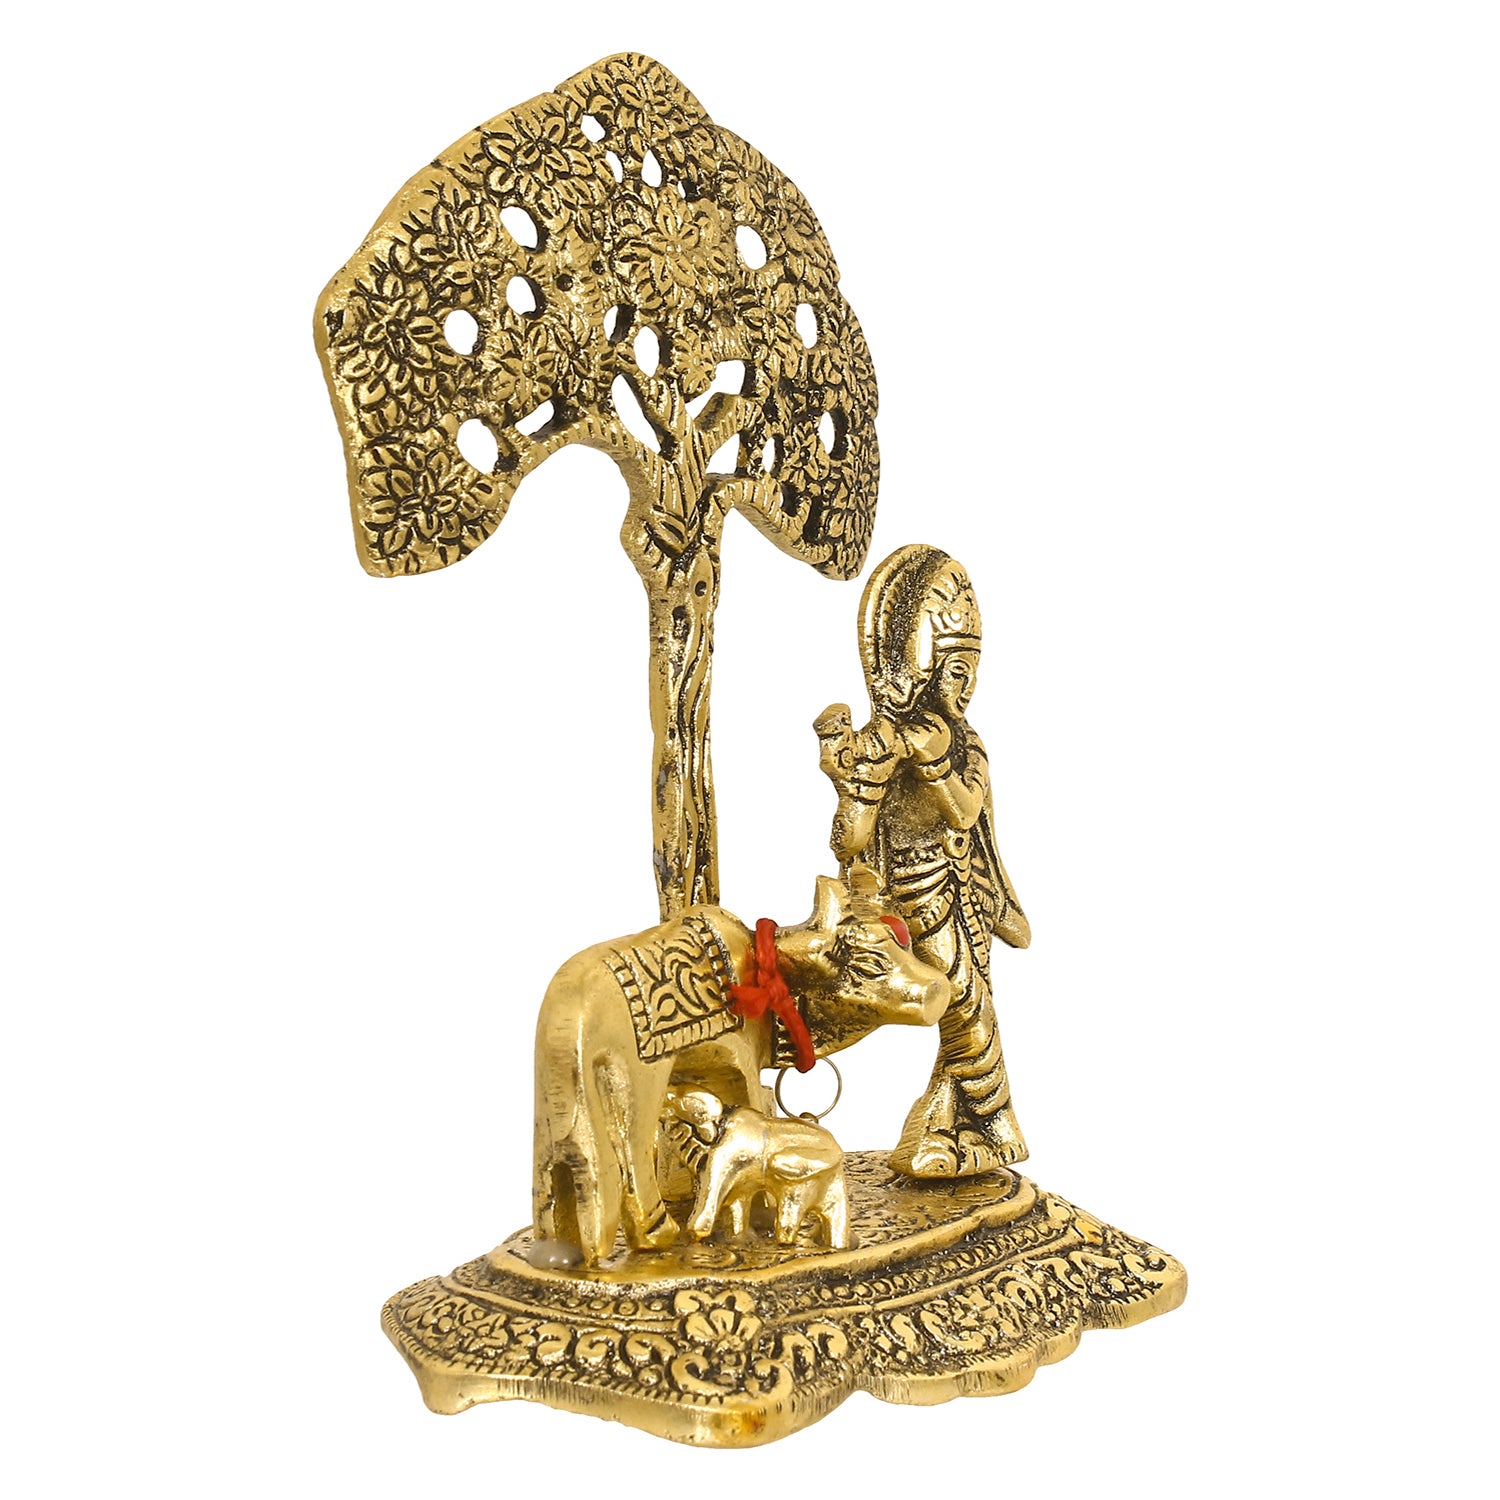 Golden Lord Krishna Idol playing Flute under Tree with Cow and Calf 4